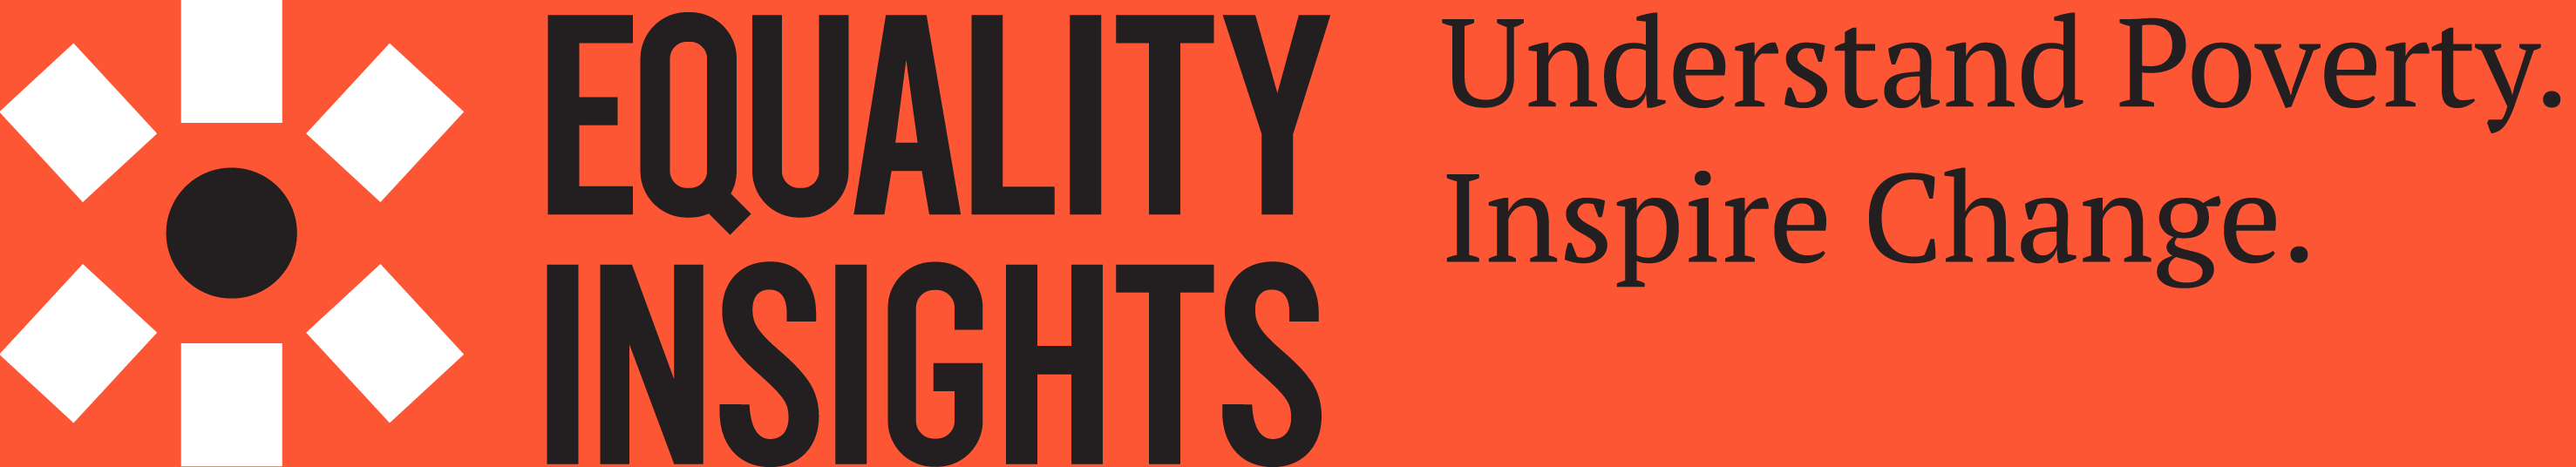 Equality Insights logo with the tagline "Understand poverty inspire change"